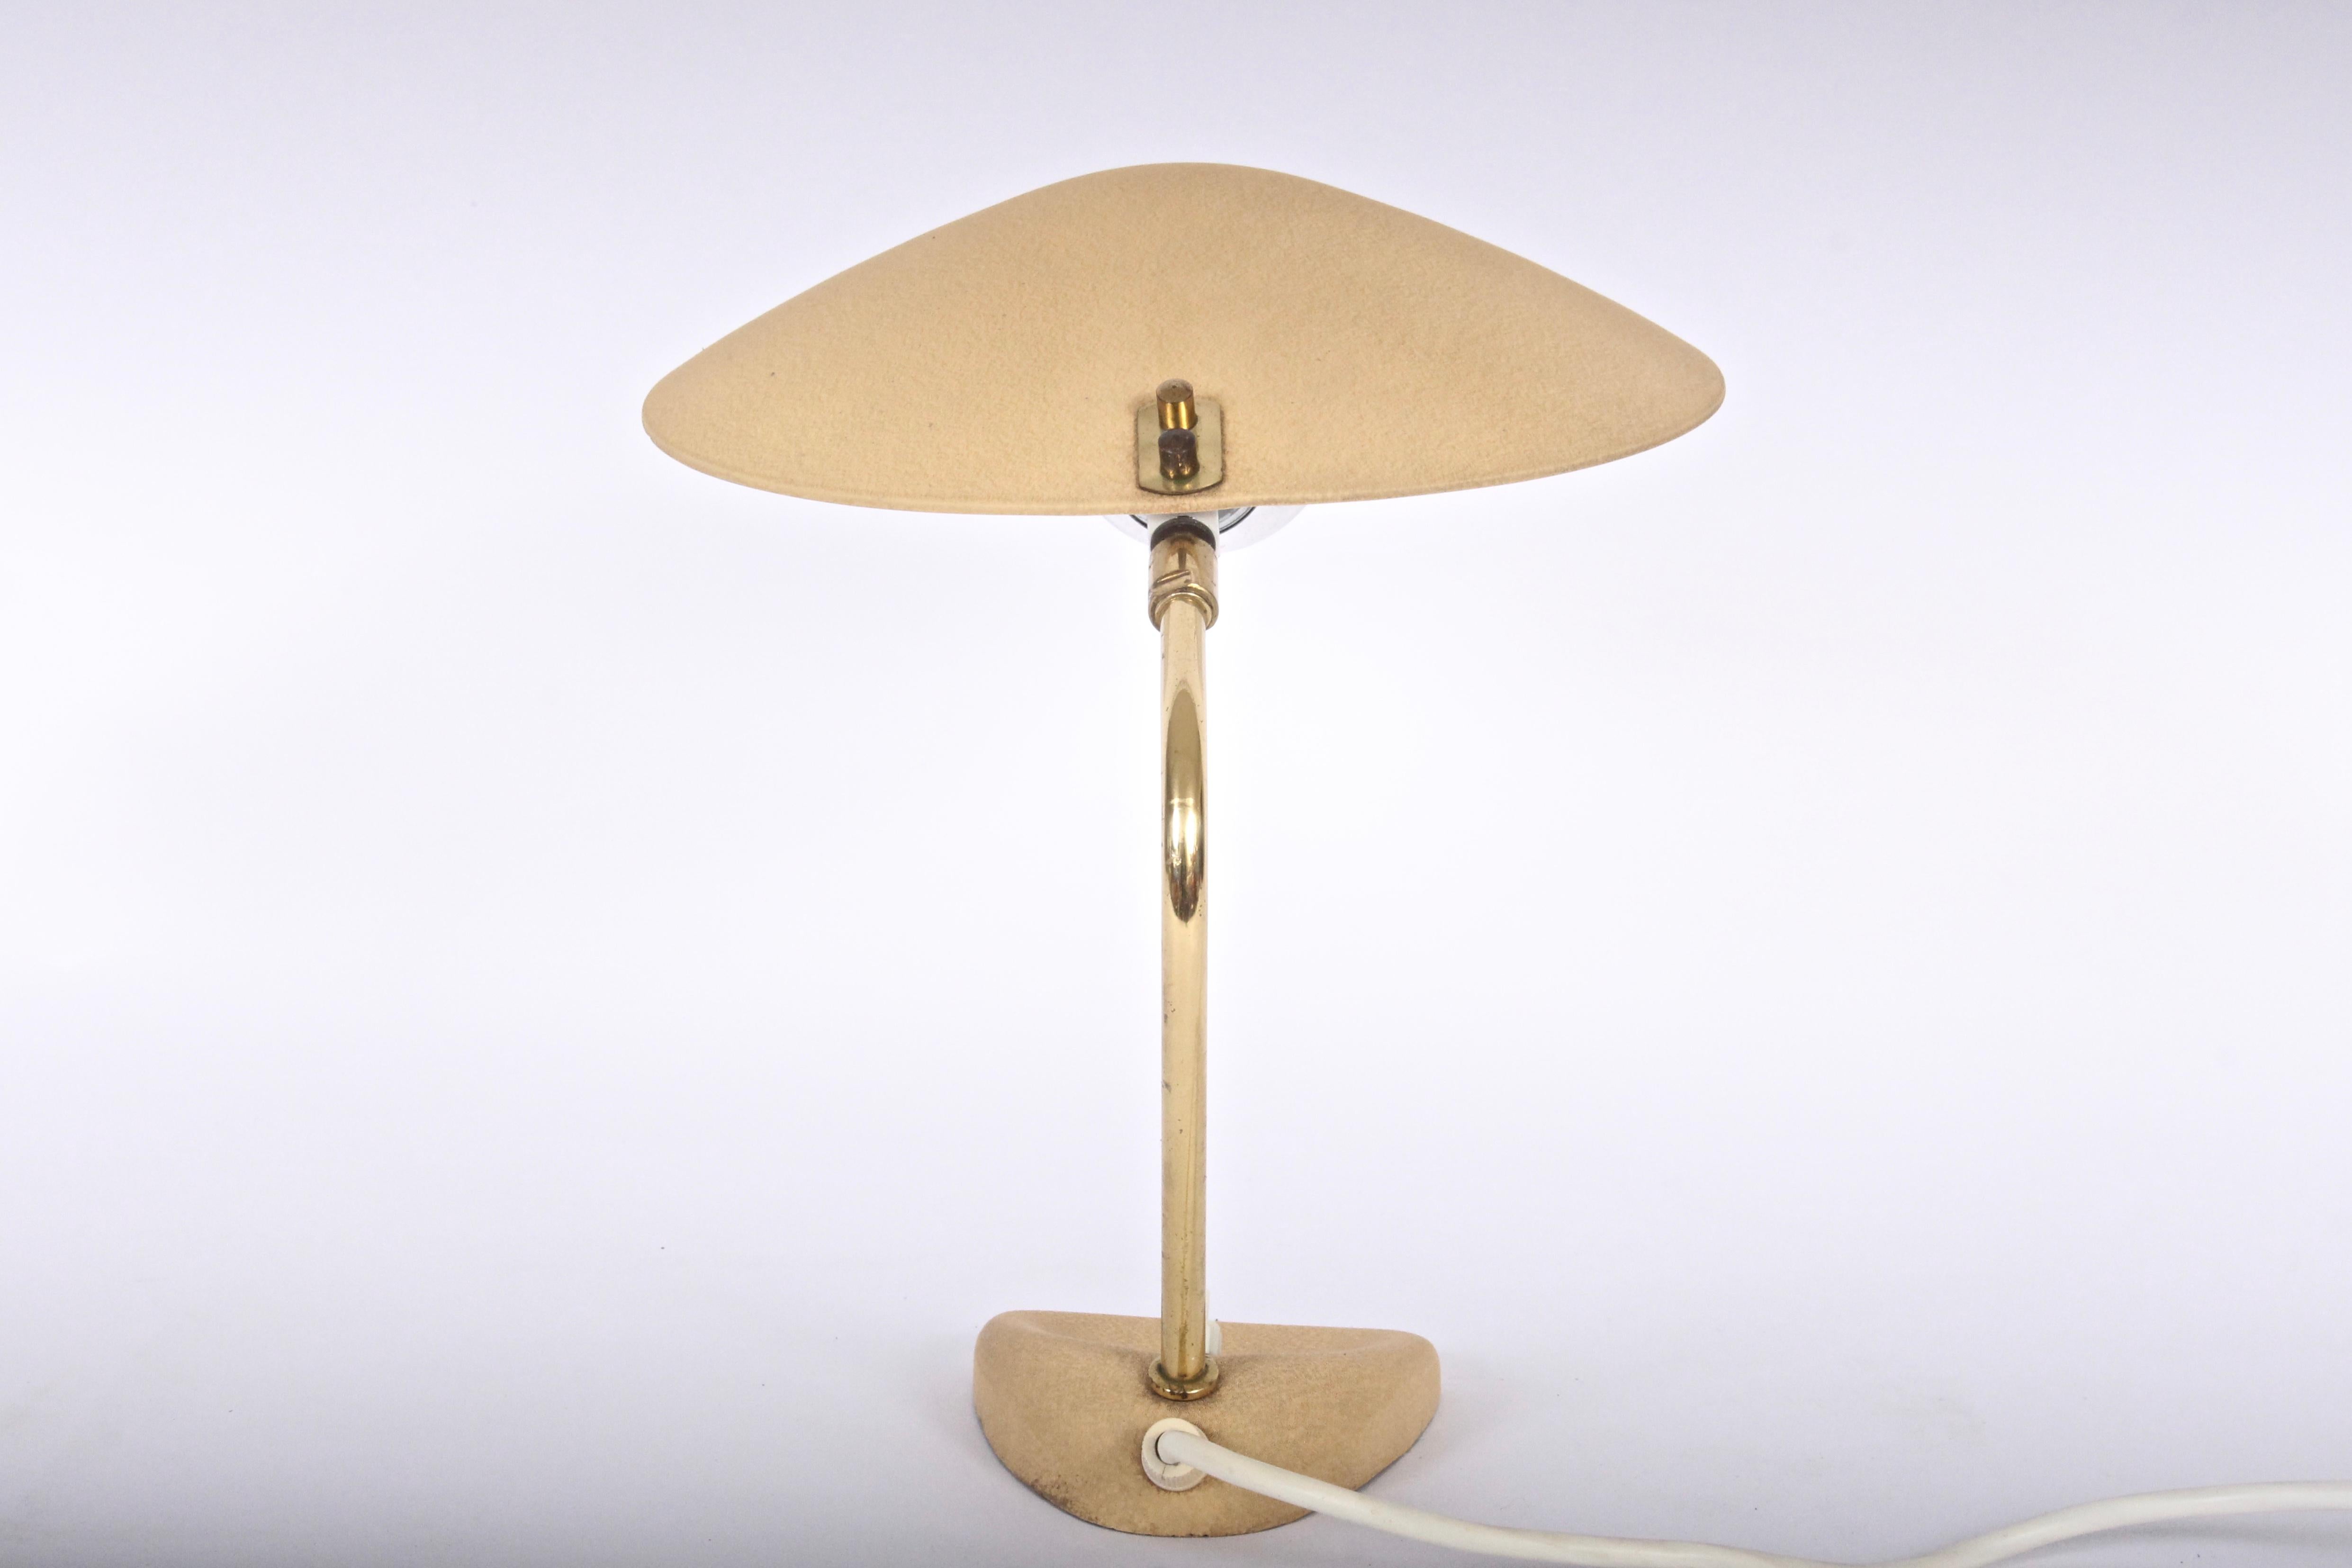 Italian Stilnovo Style Camel toned Desk Lamp with Saucer Shade, circa 1950s For Sale